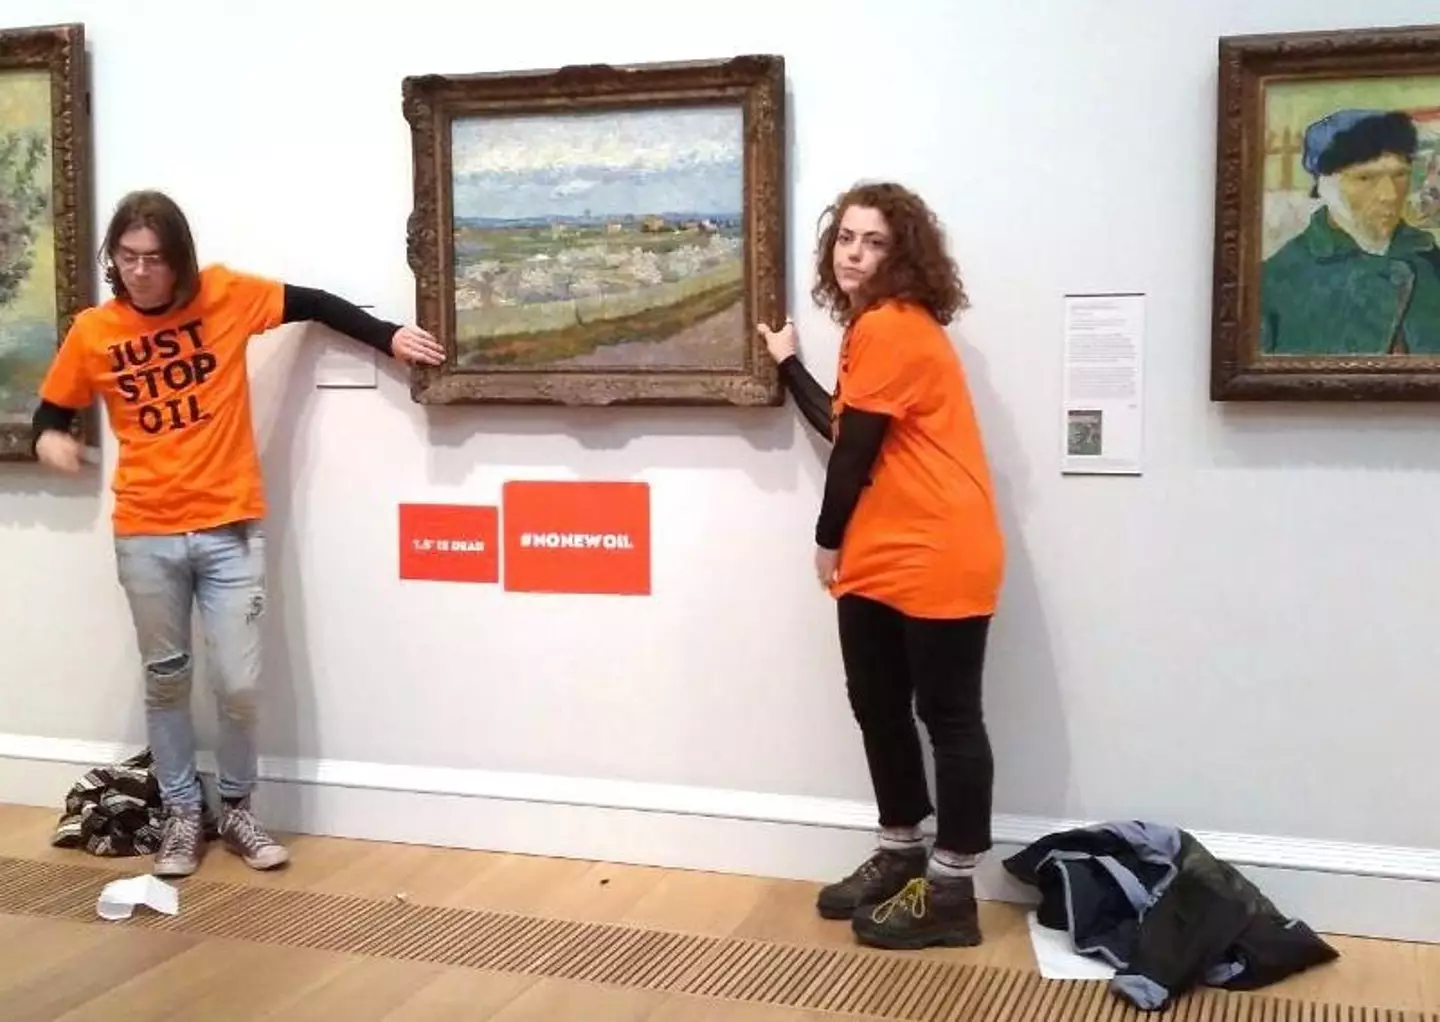 Just Stop Oil activists glued themselves to another Van Gogh painting in June.